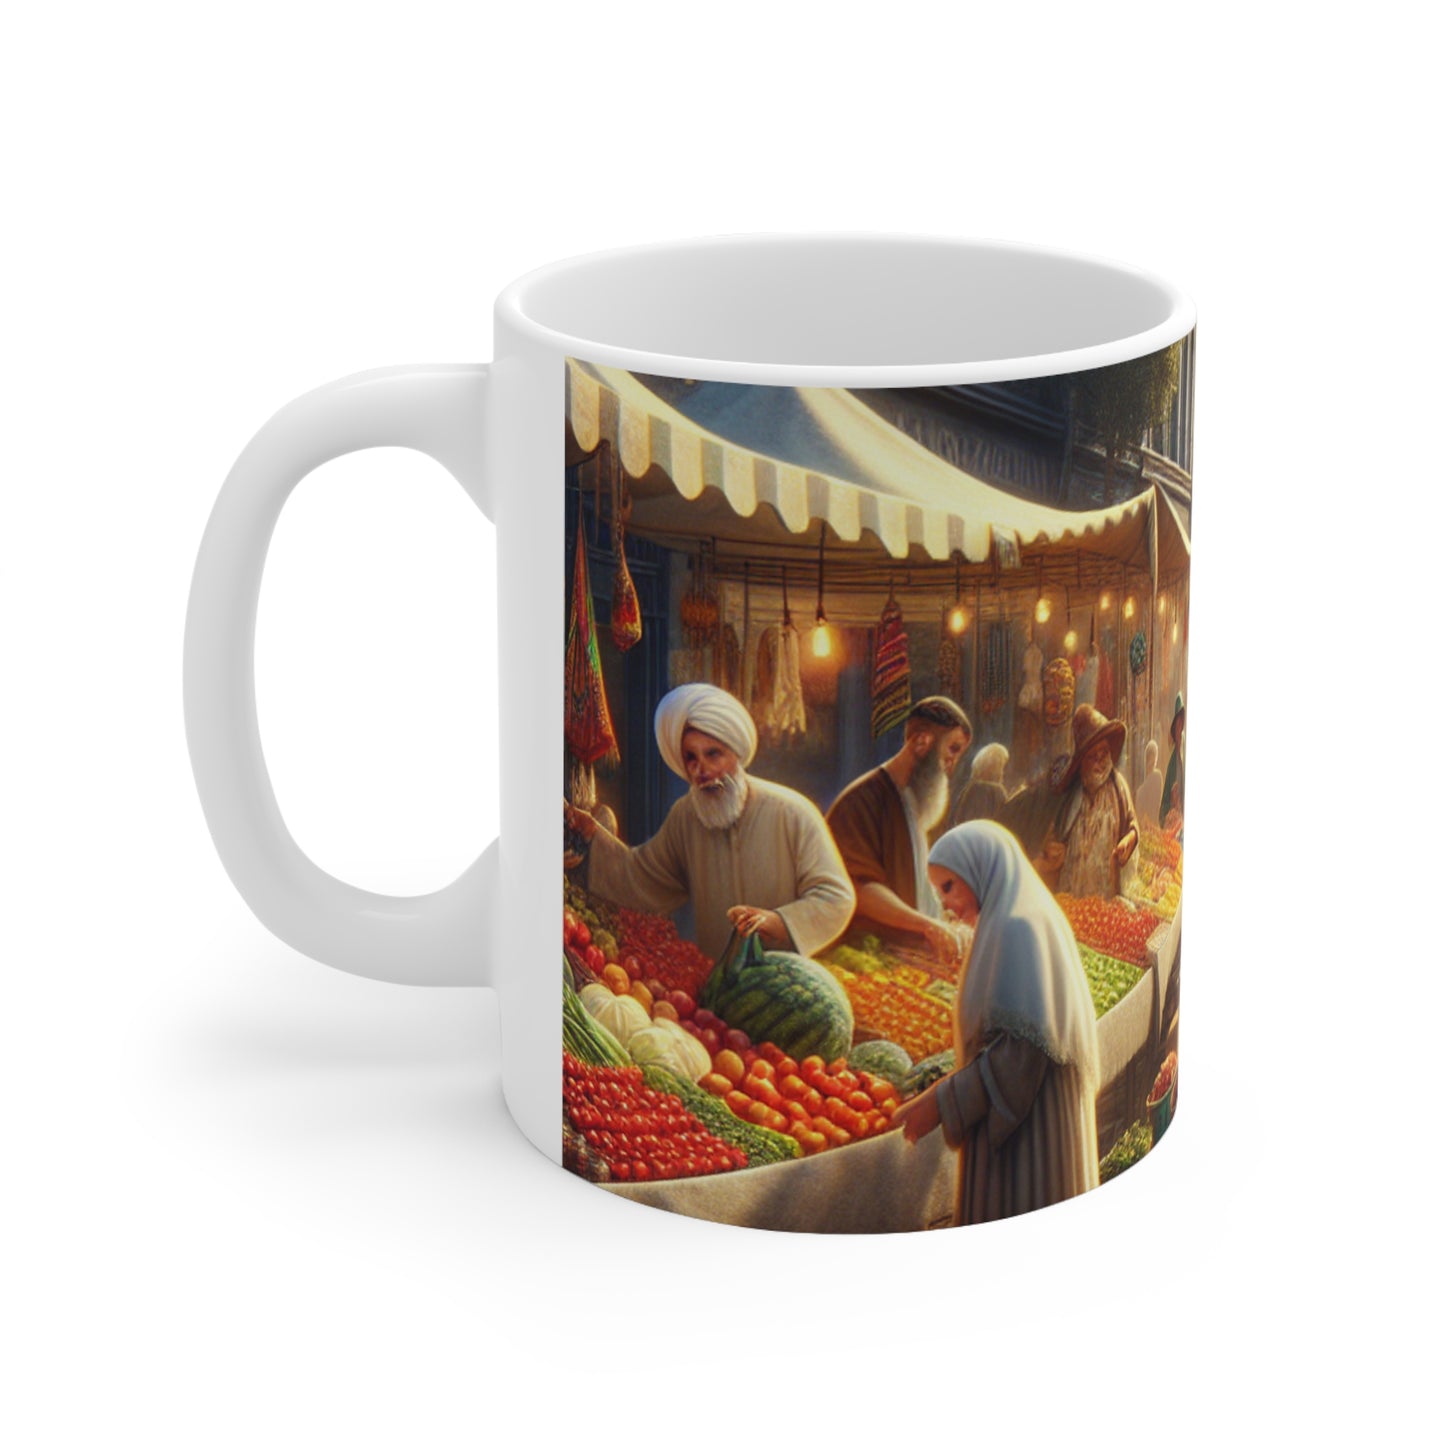 "Sunny Vibes at the Outdoor Market" - The Alien Ceramic Mug 11oz Realism Style